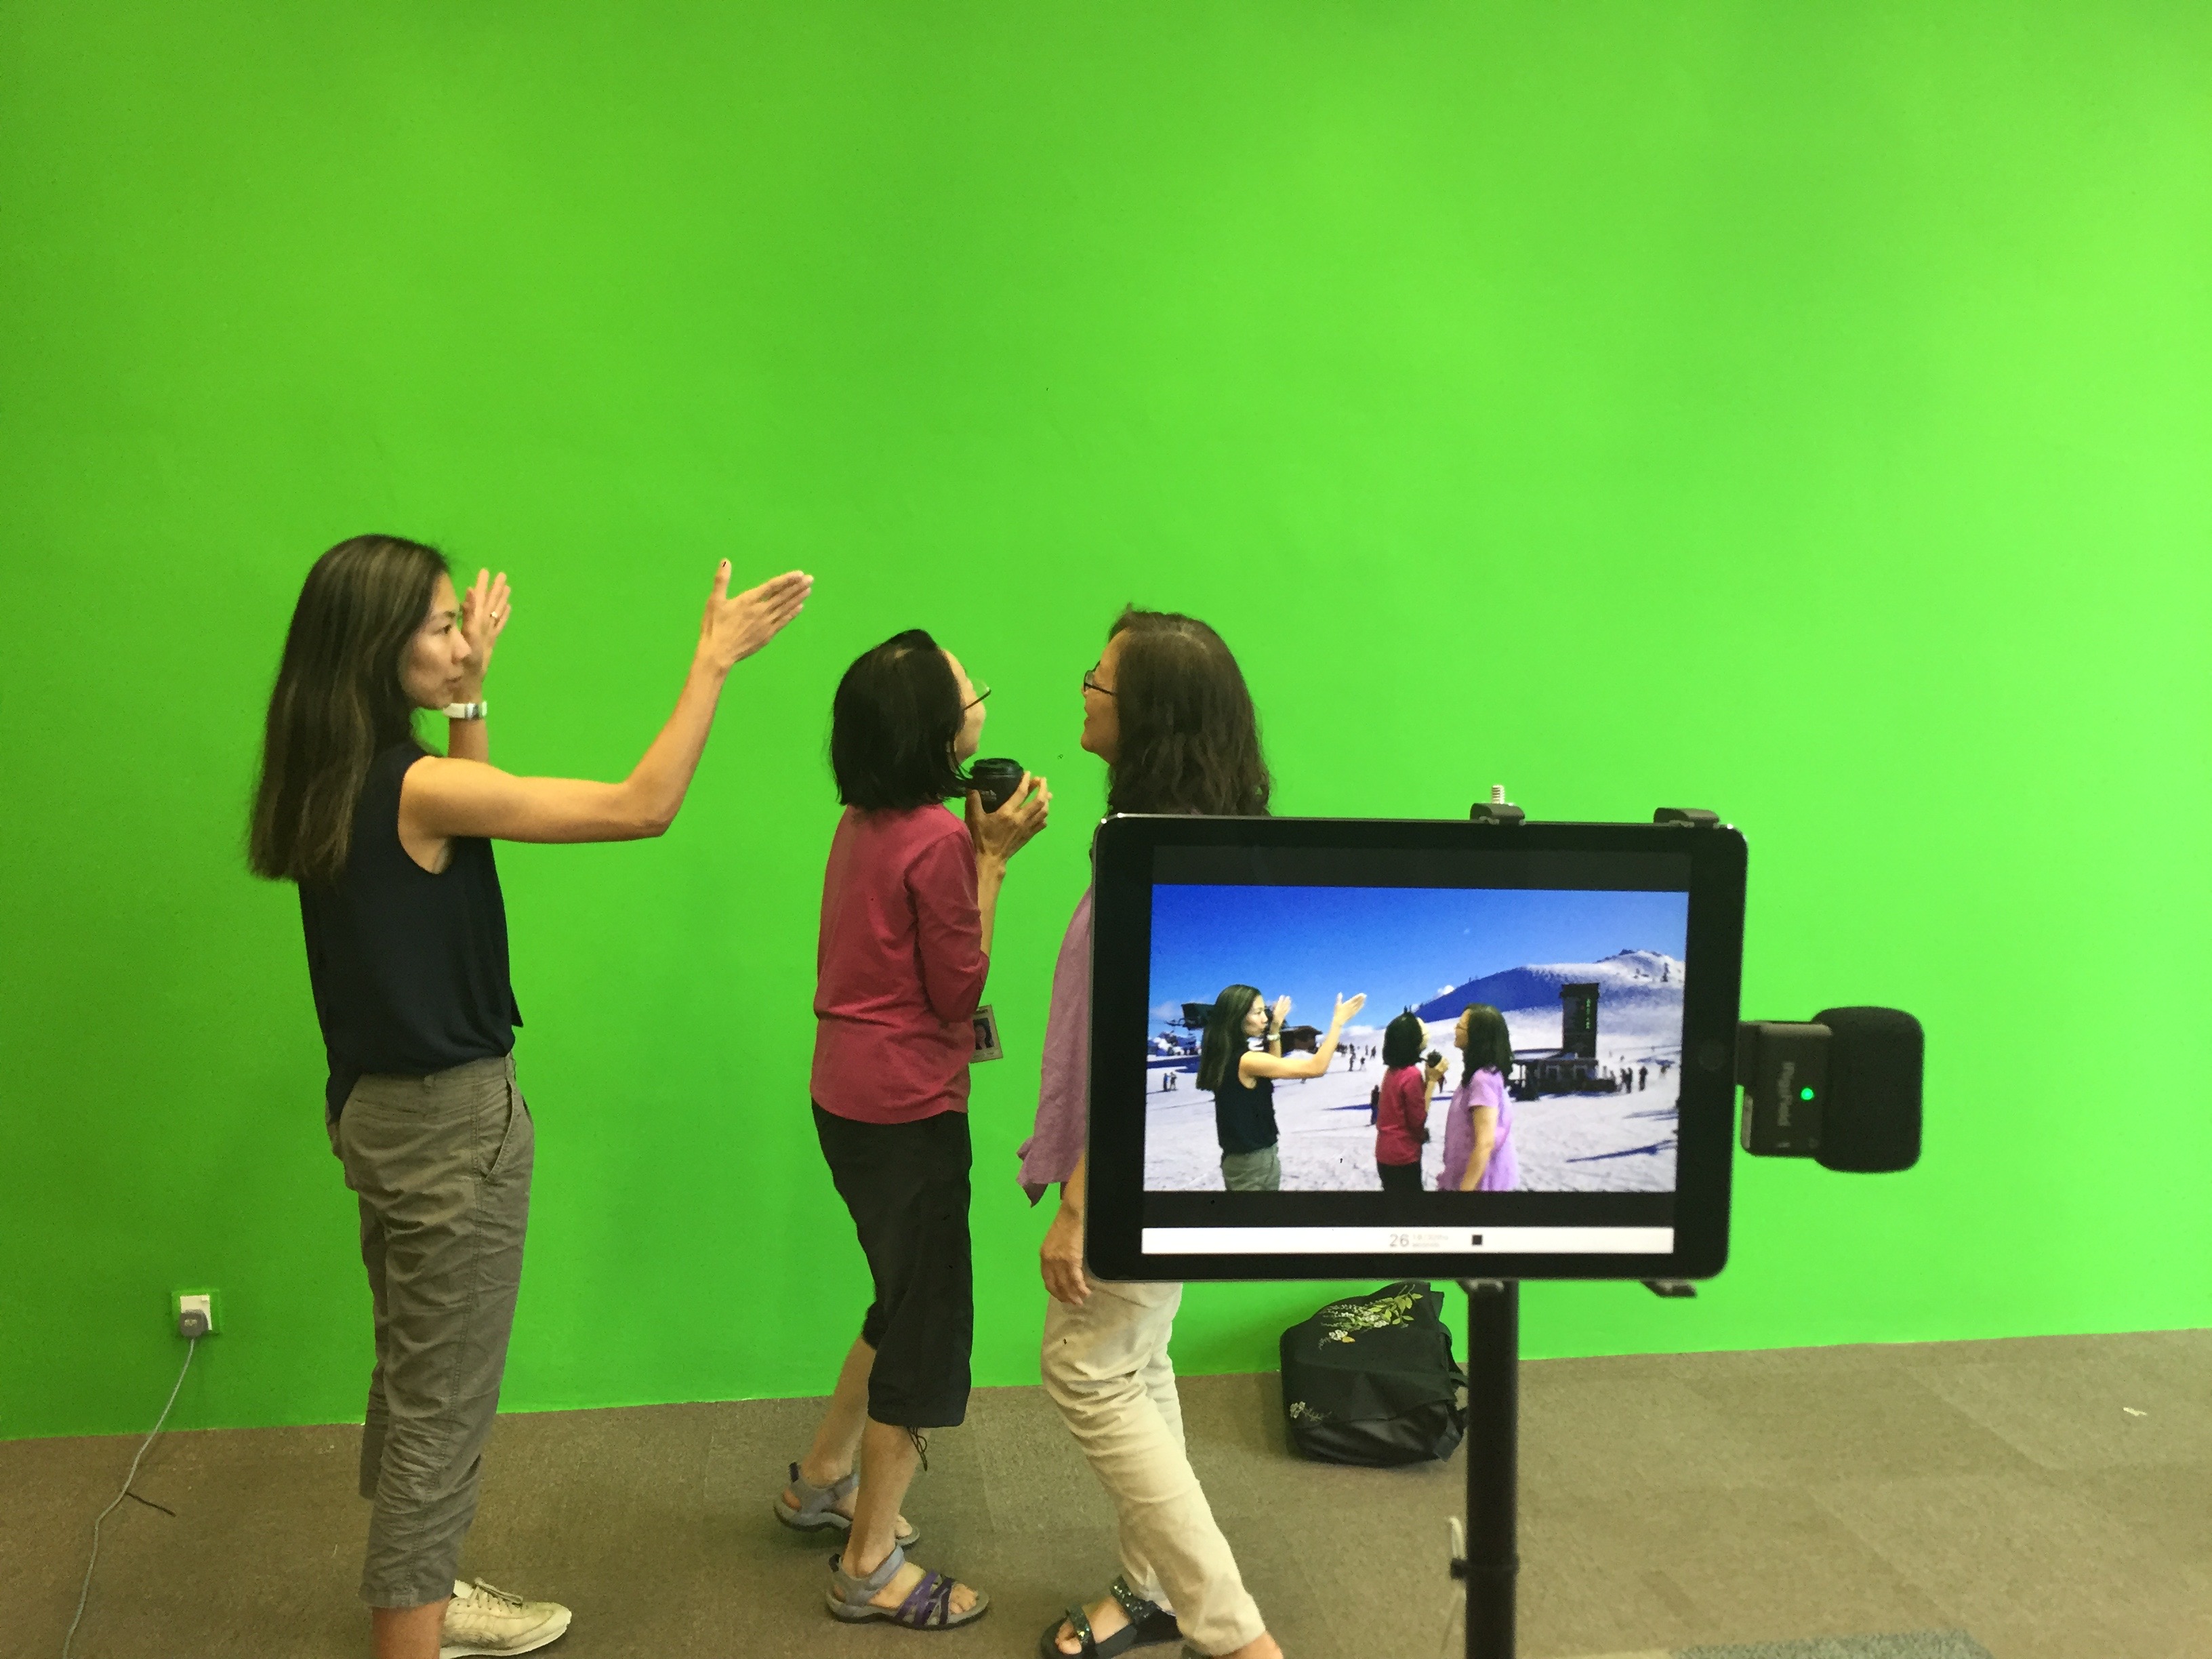 6) Parents are amazed at the Green Screen technology during workshop